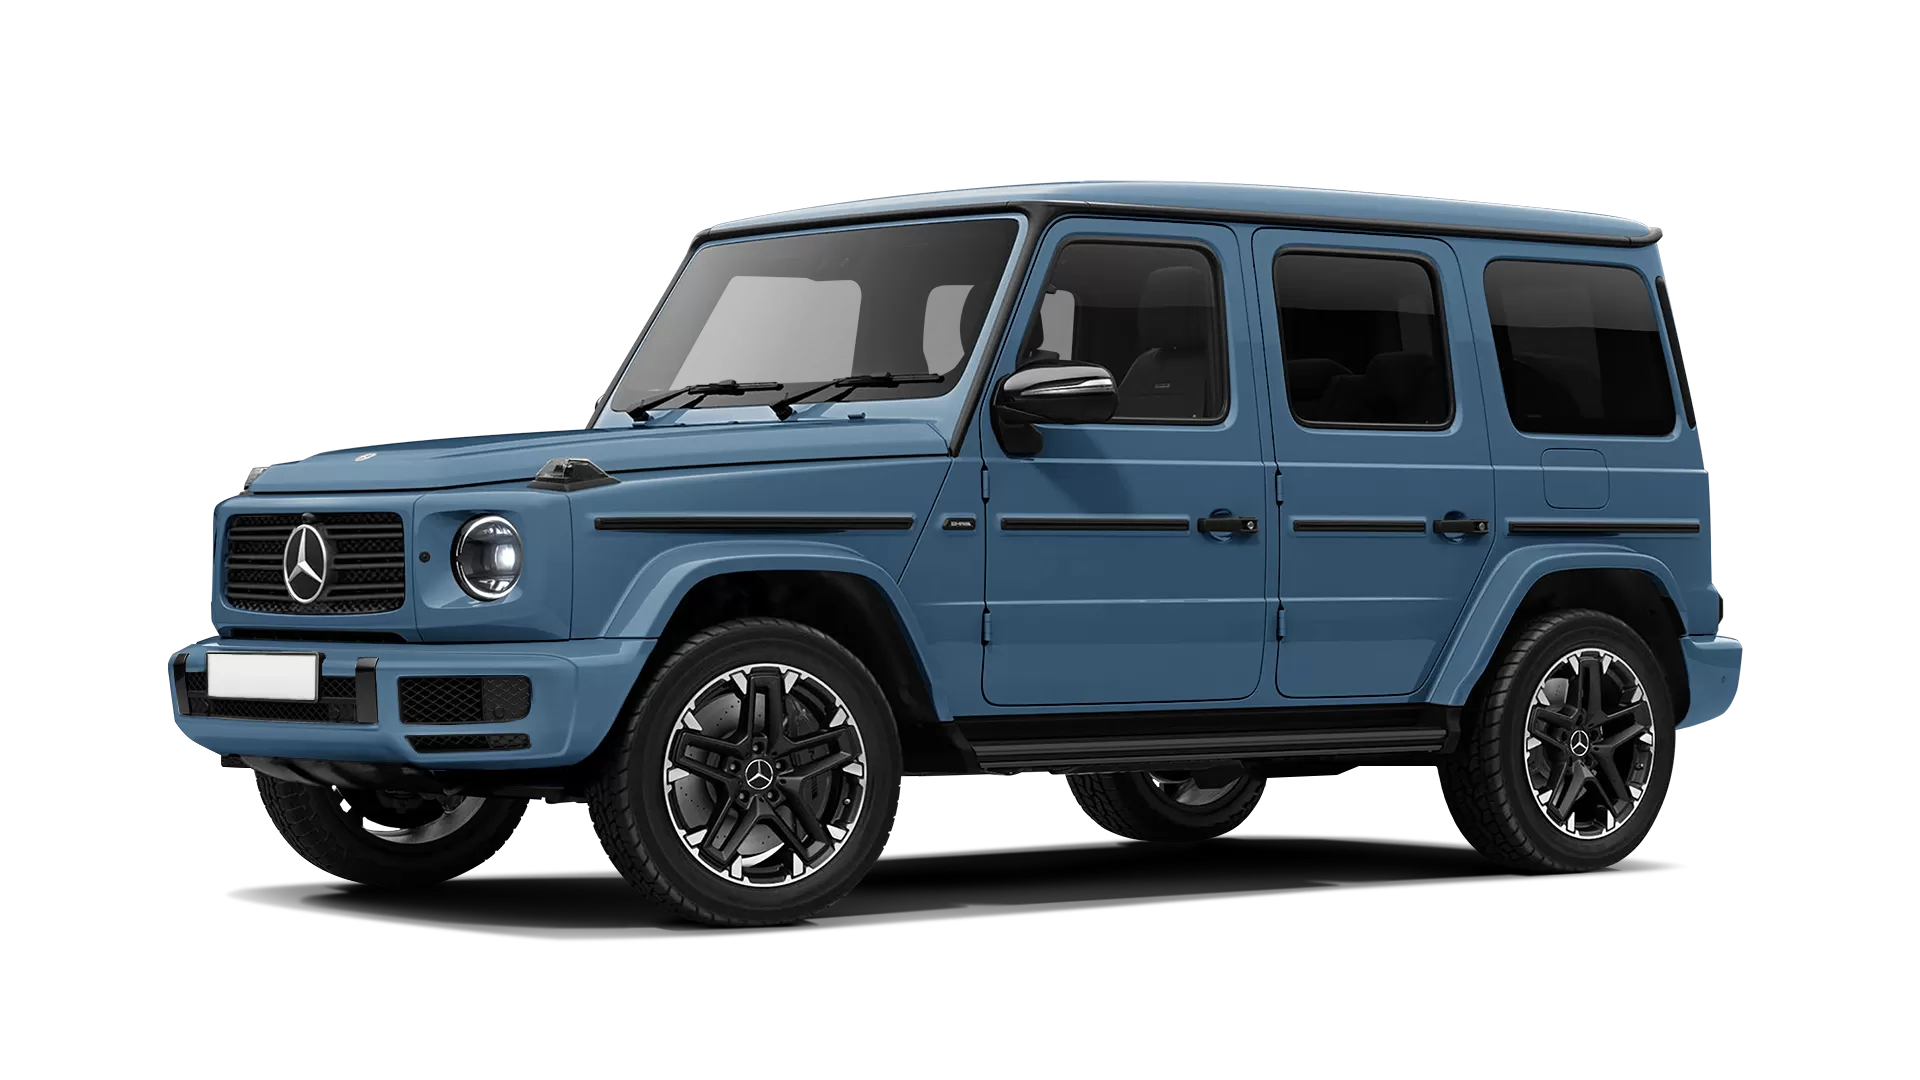 Mercedes G class W463 stock front view in Vintage Blue color